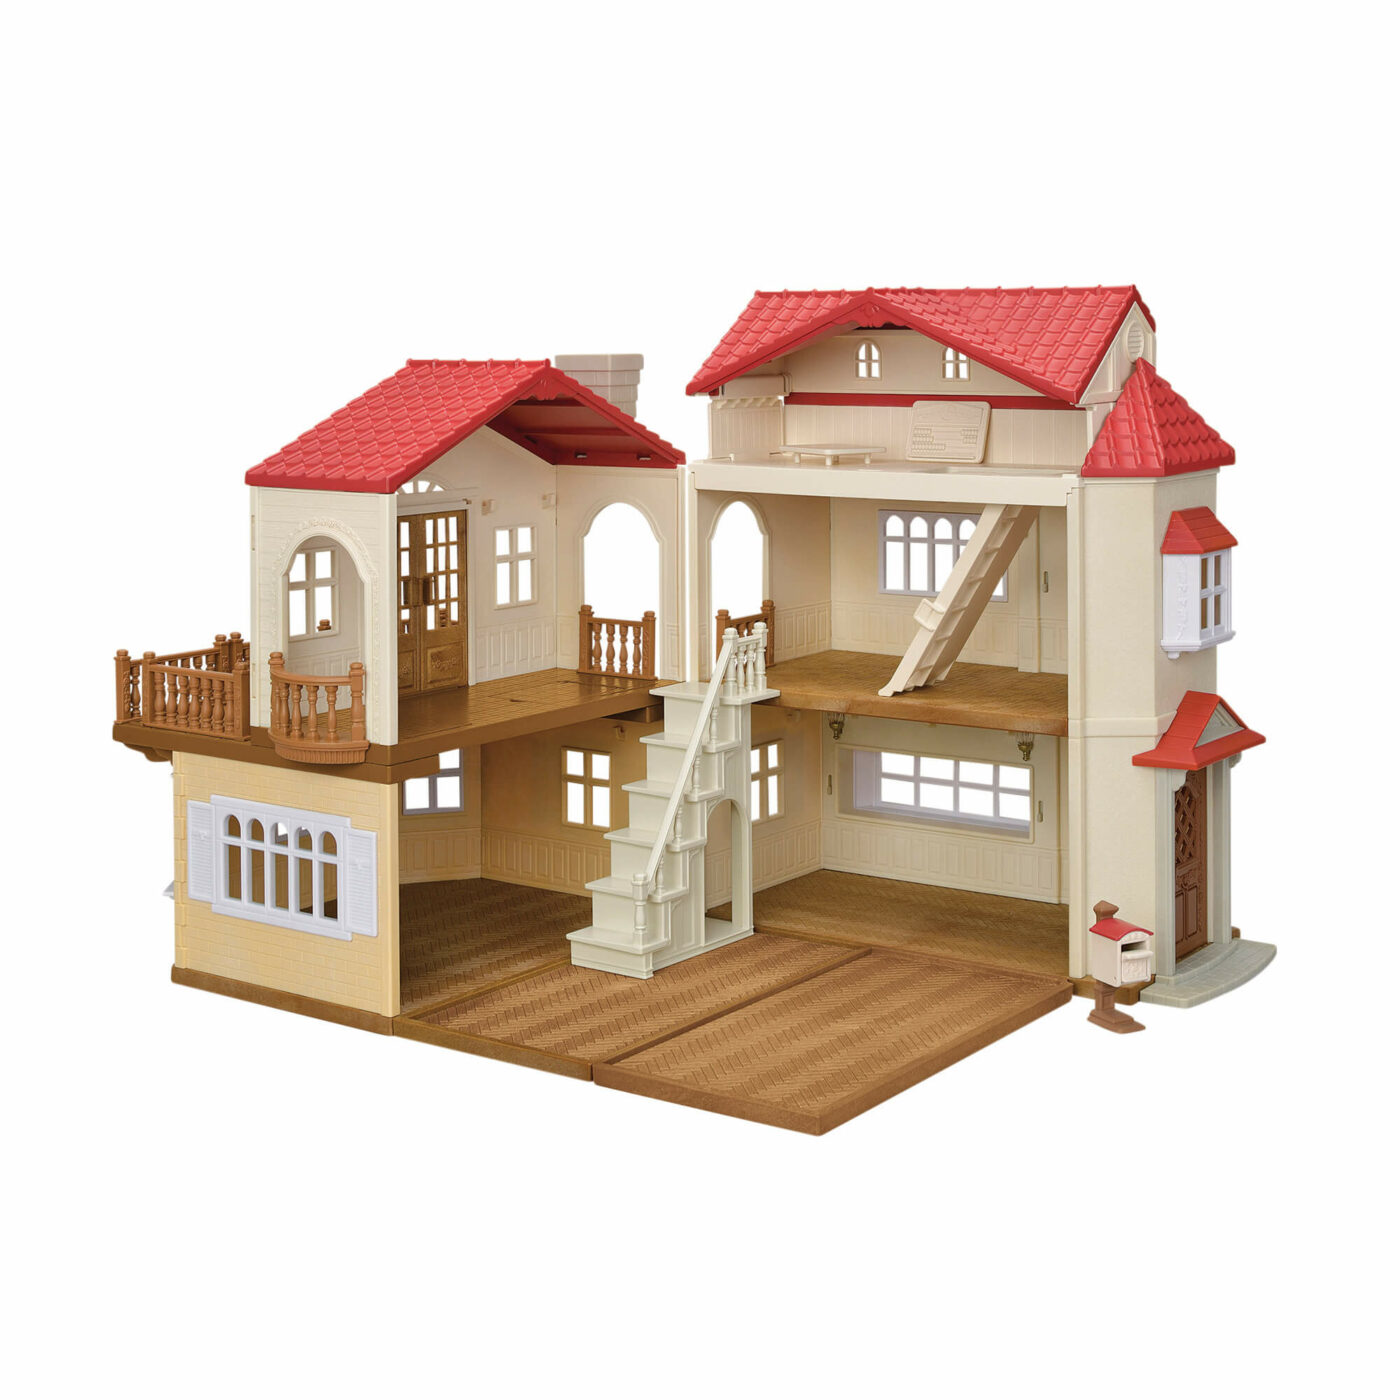 Sylvanian Families - Red Roof Country Home - Secret Attic Playroom SF5708-4